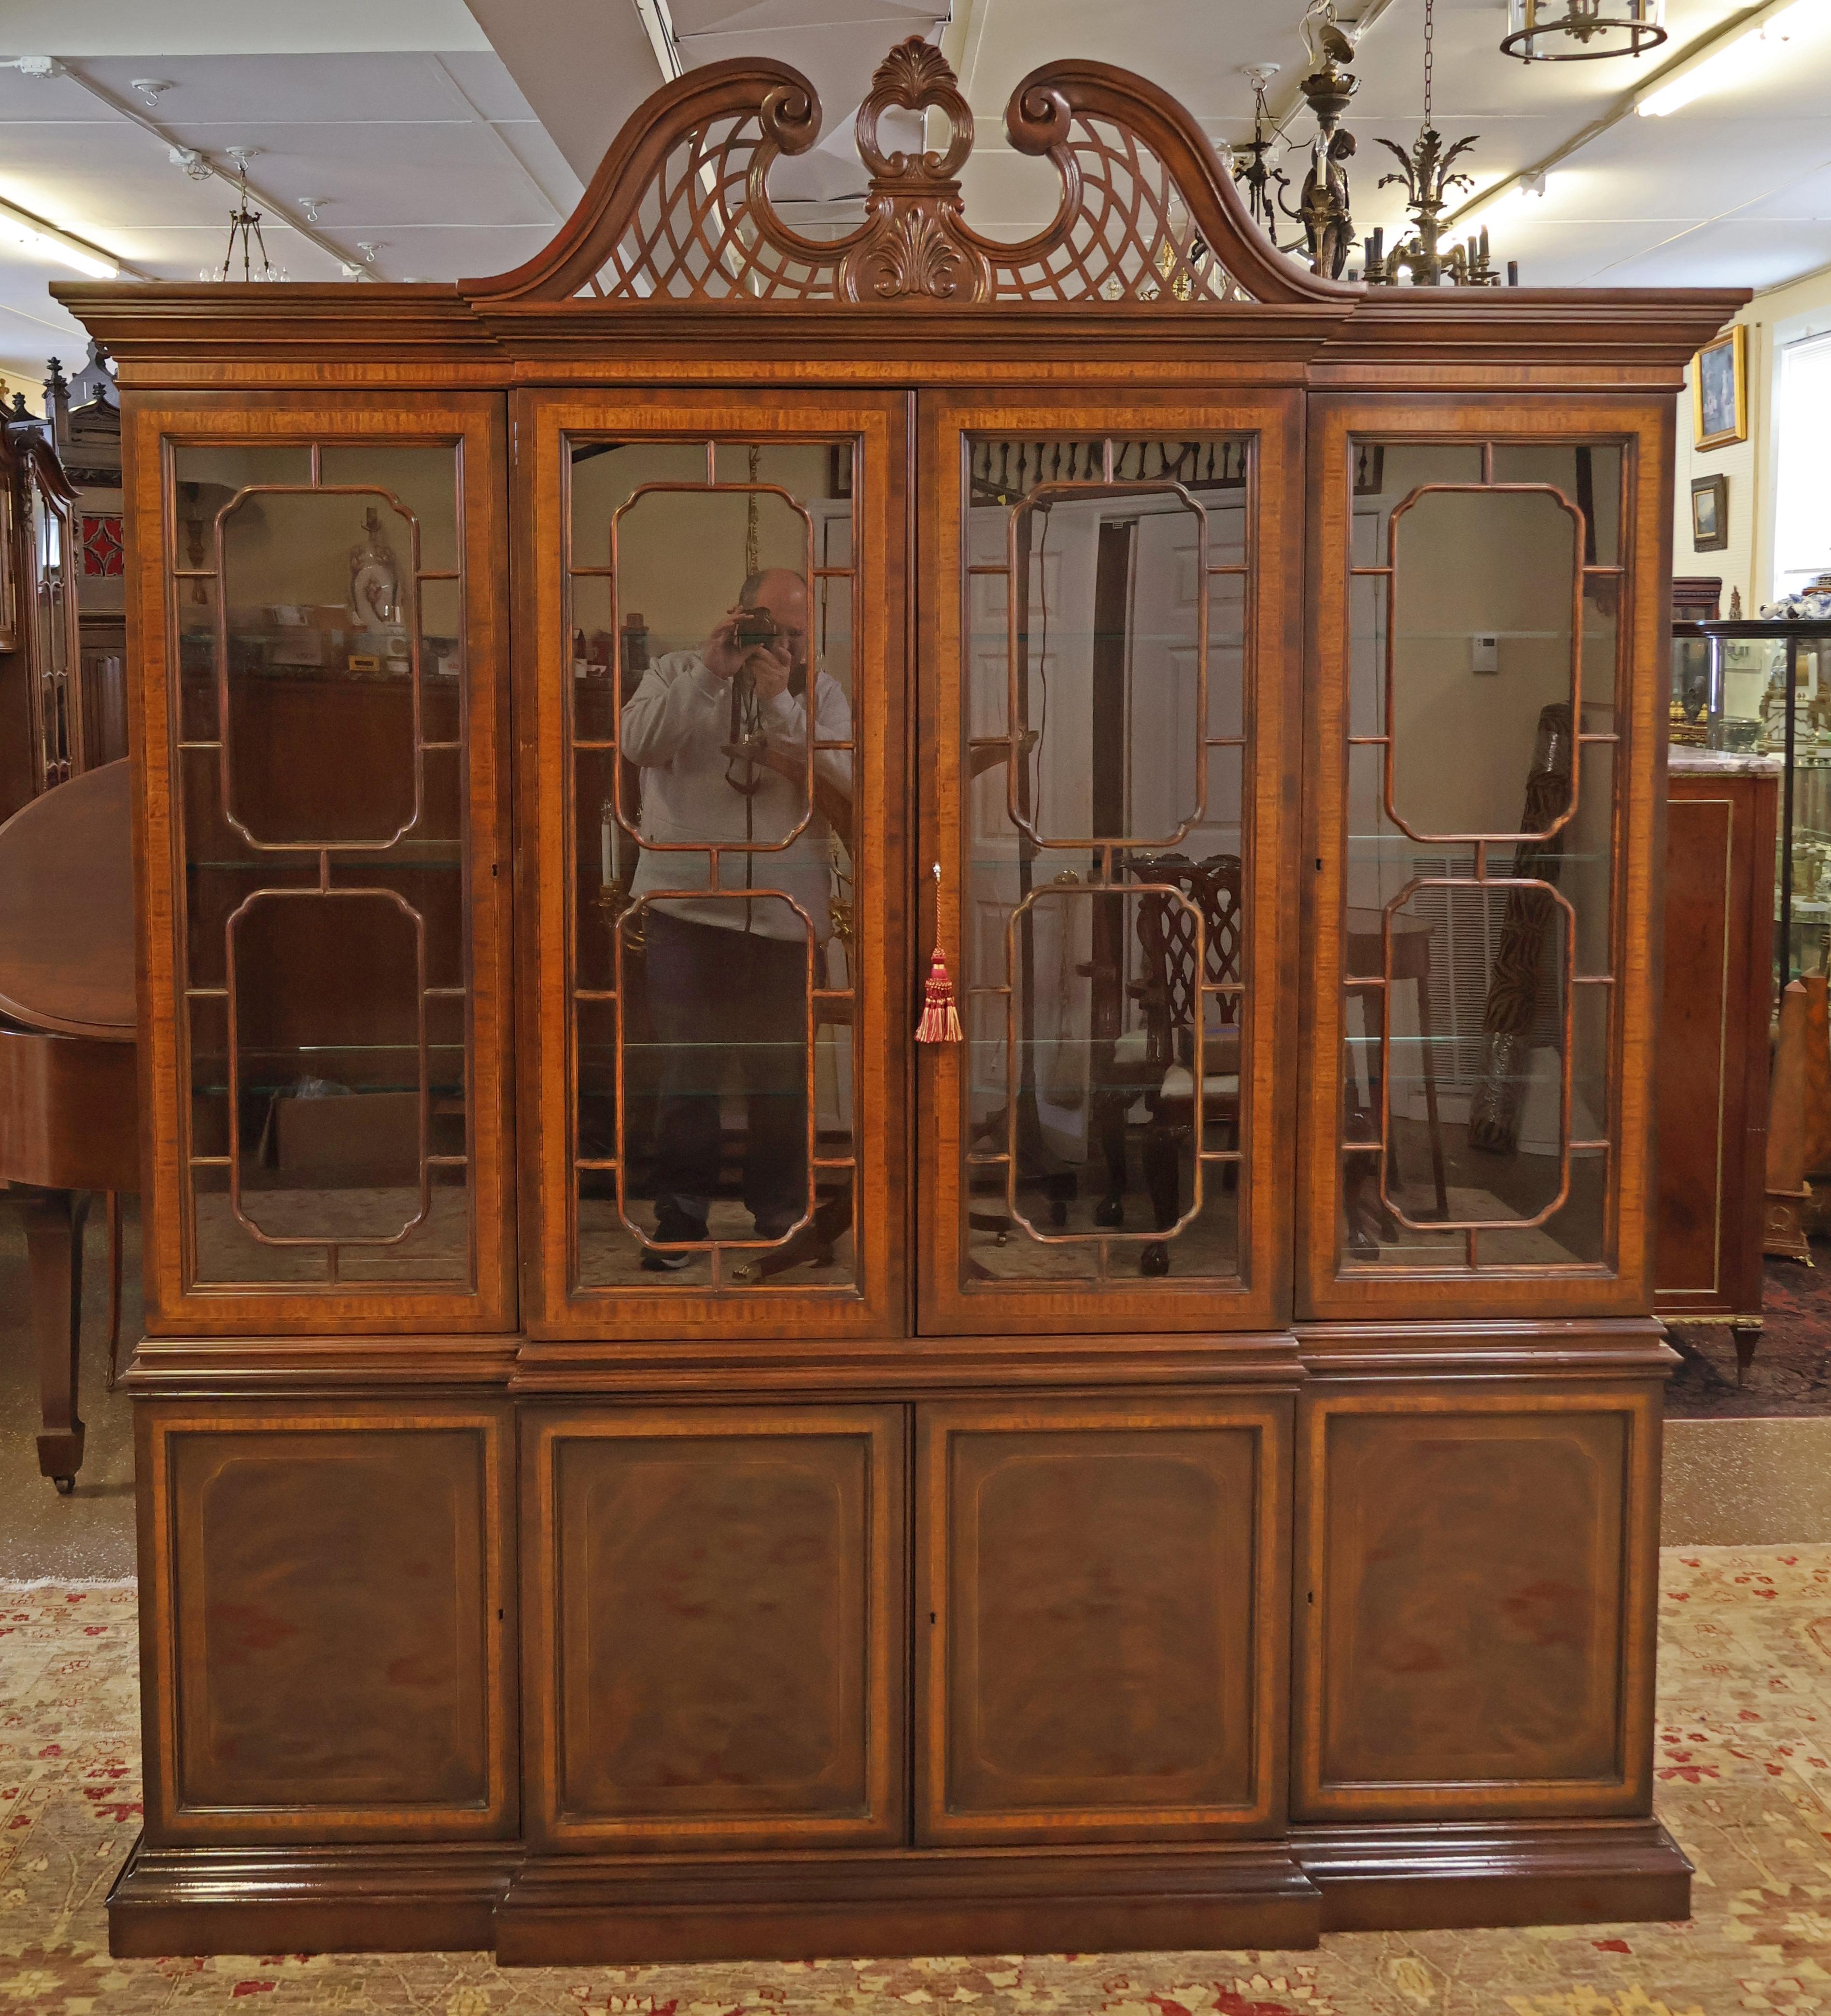 ​Flame Mahogany Heritage Drexel Bookcase China Cabinet Breakfront

Dimensions : 91.25